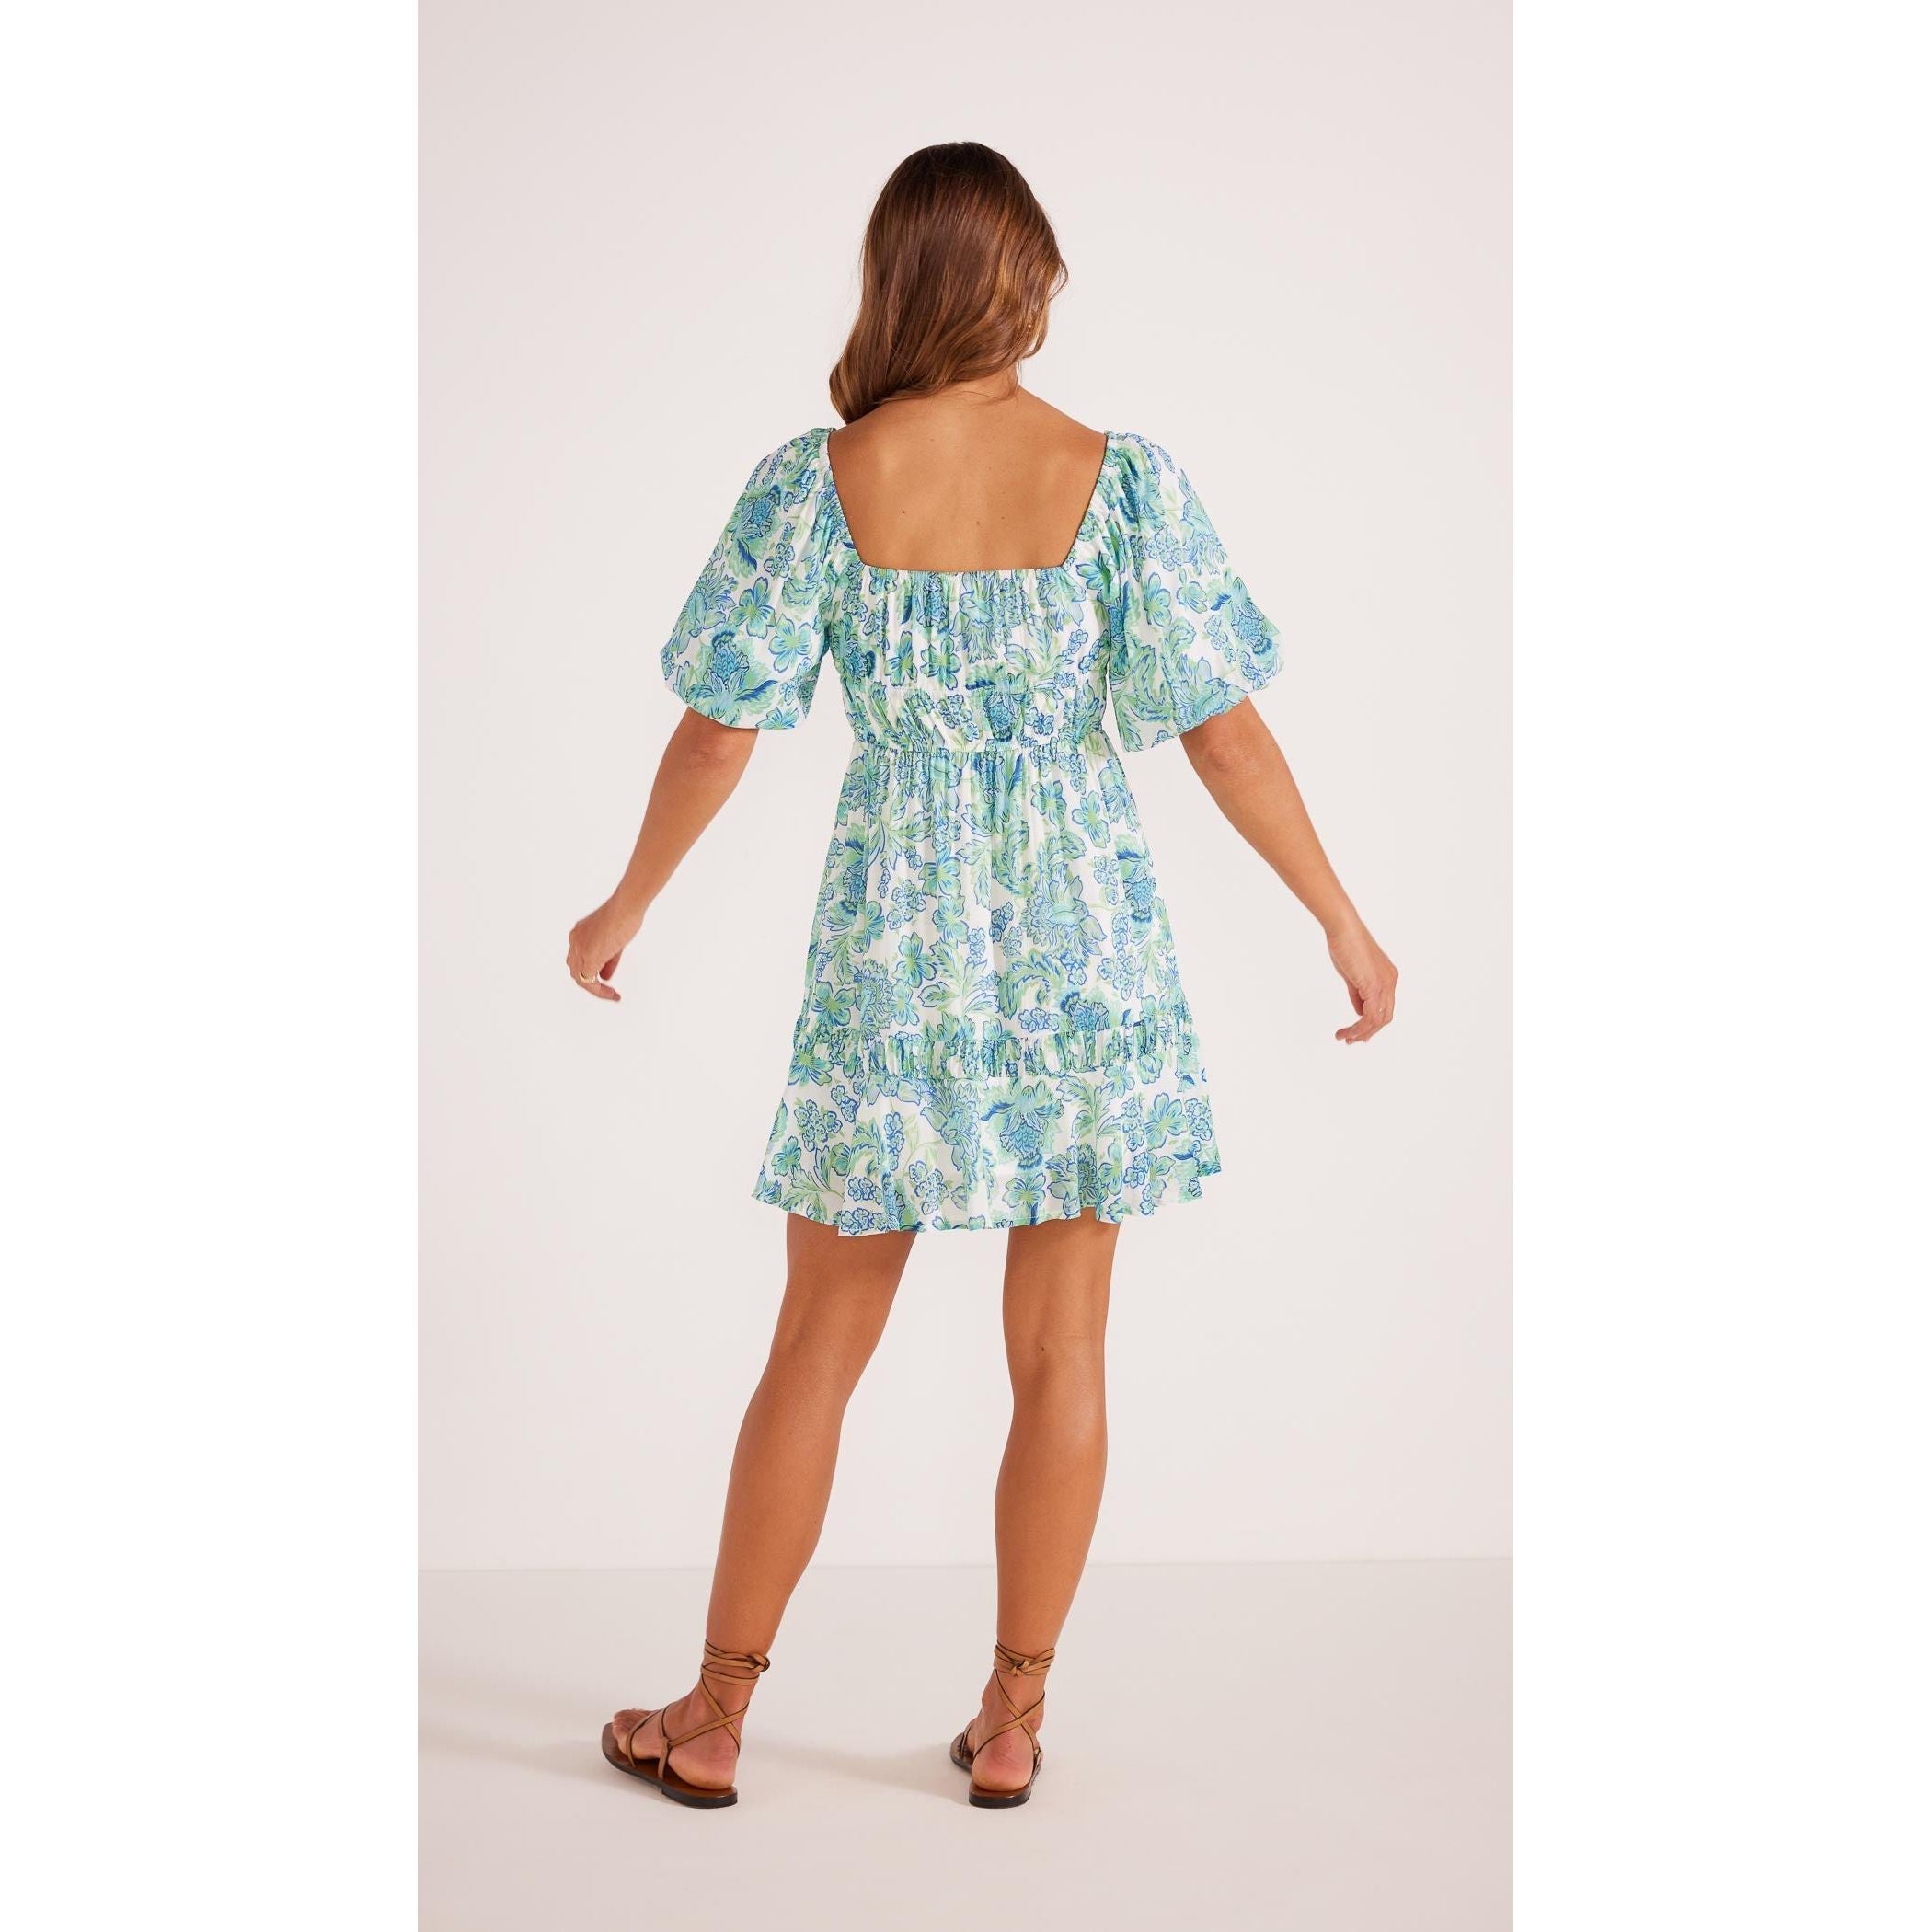 Mink Pink - Alessia Puffed Sleeve Dress in Blue Green Floral